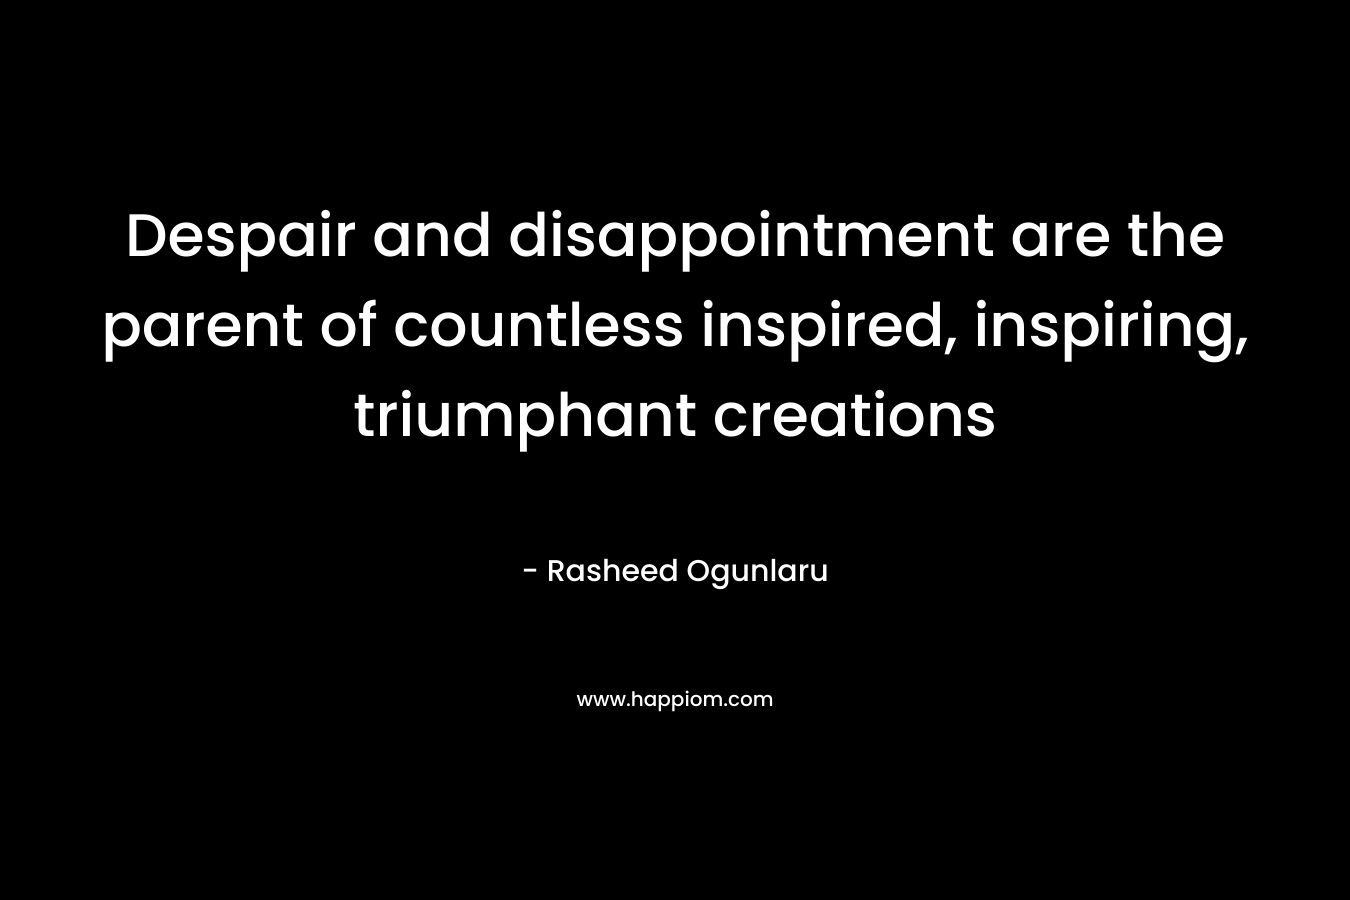 Despair and disappointment are the parent of countless inspired, inspiring, triumphant creations – Rasheed Ogunlaru